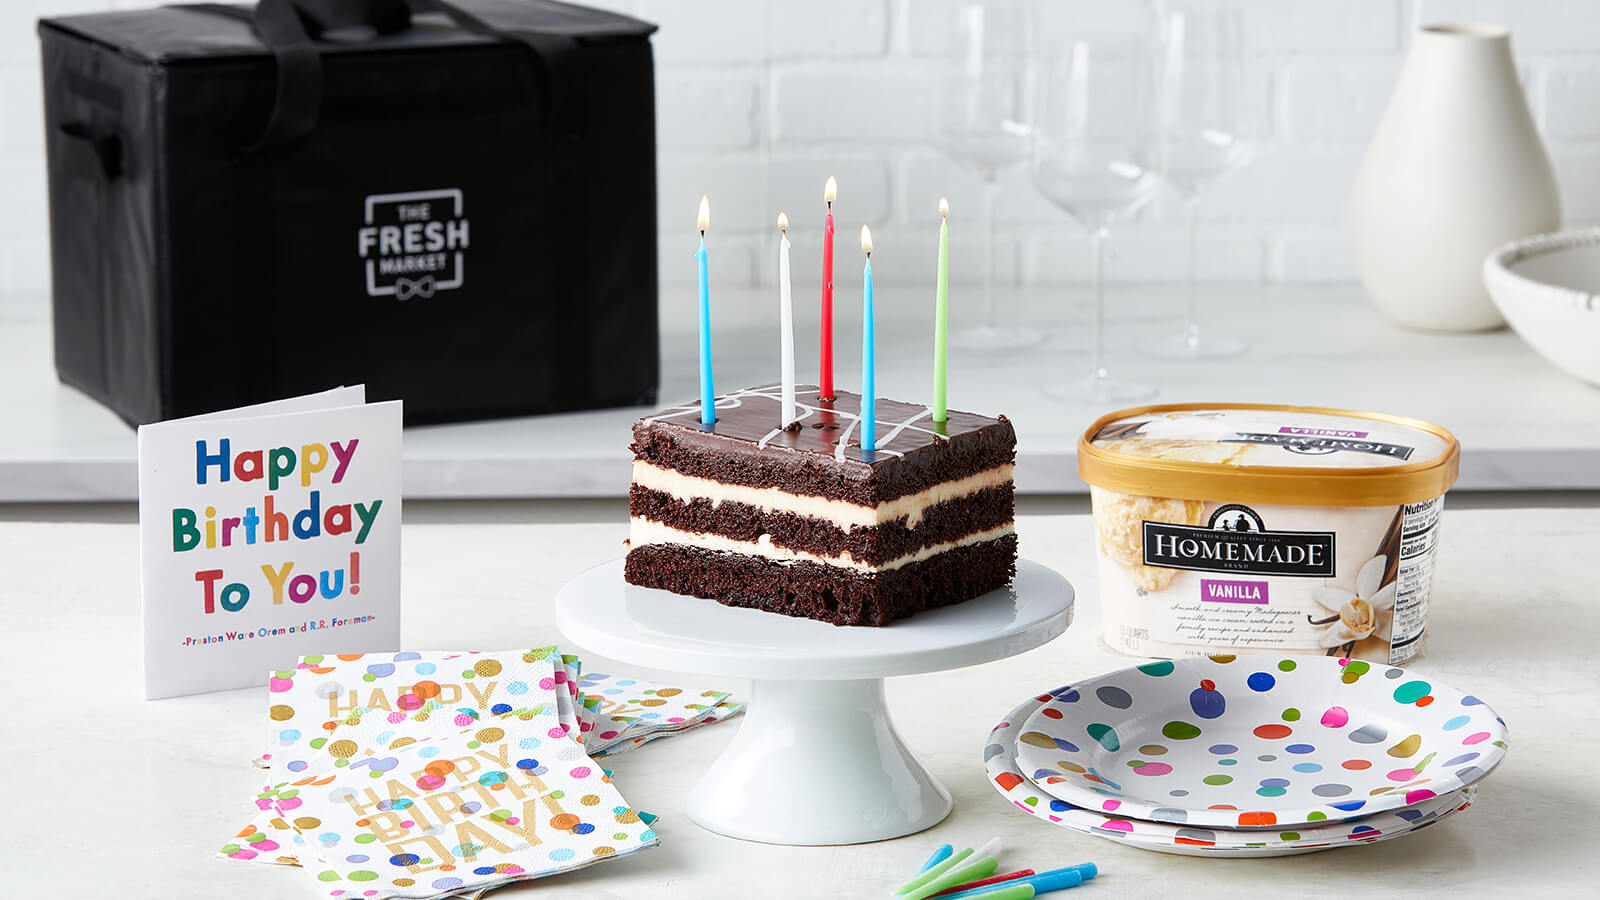 Amazon.com: Happy Birthday Gift Box - Birthday Cake Candle & Soap Basket  Set, Cute Candles Gifts for Women – Unique Present Ideas for Her, Woman,  Friend, Mom, Sister, Coworker, Employee, Female :